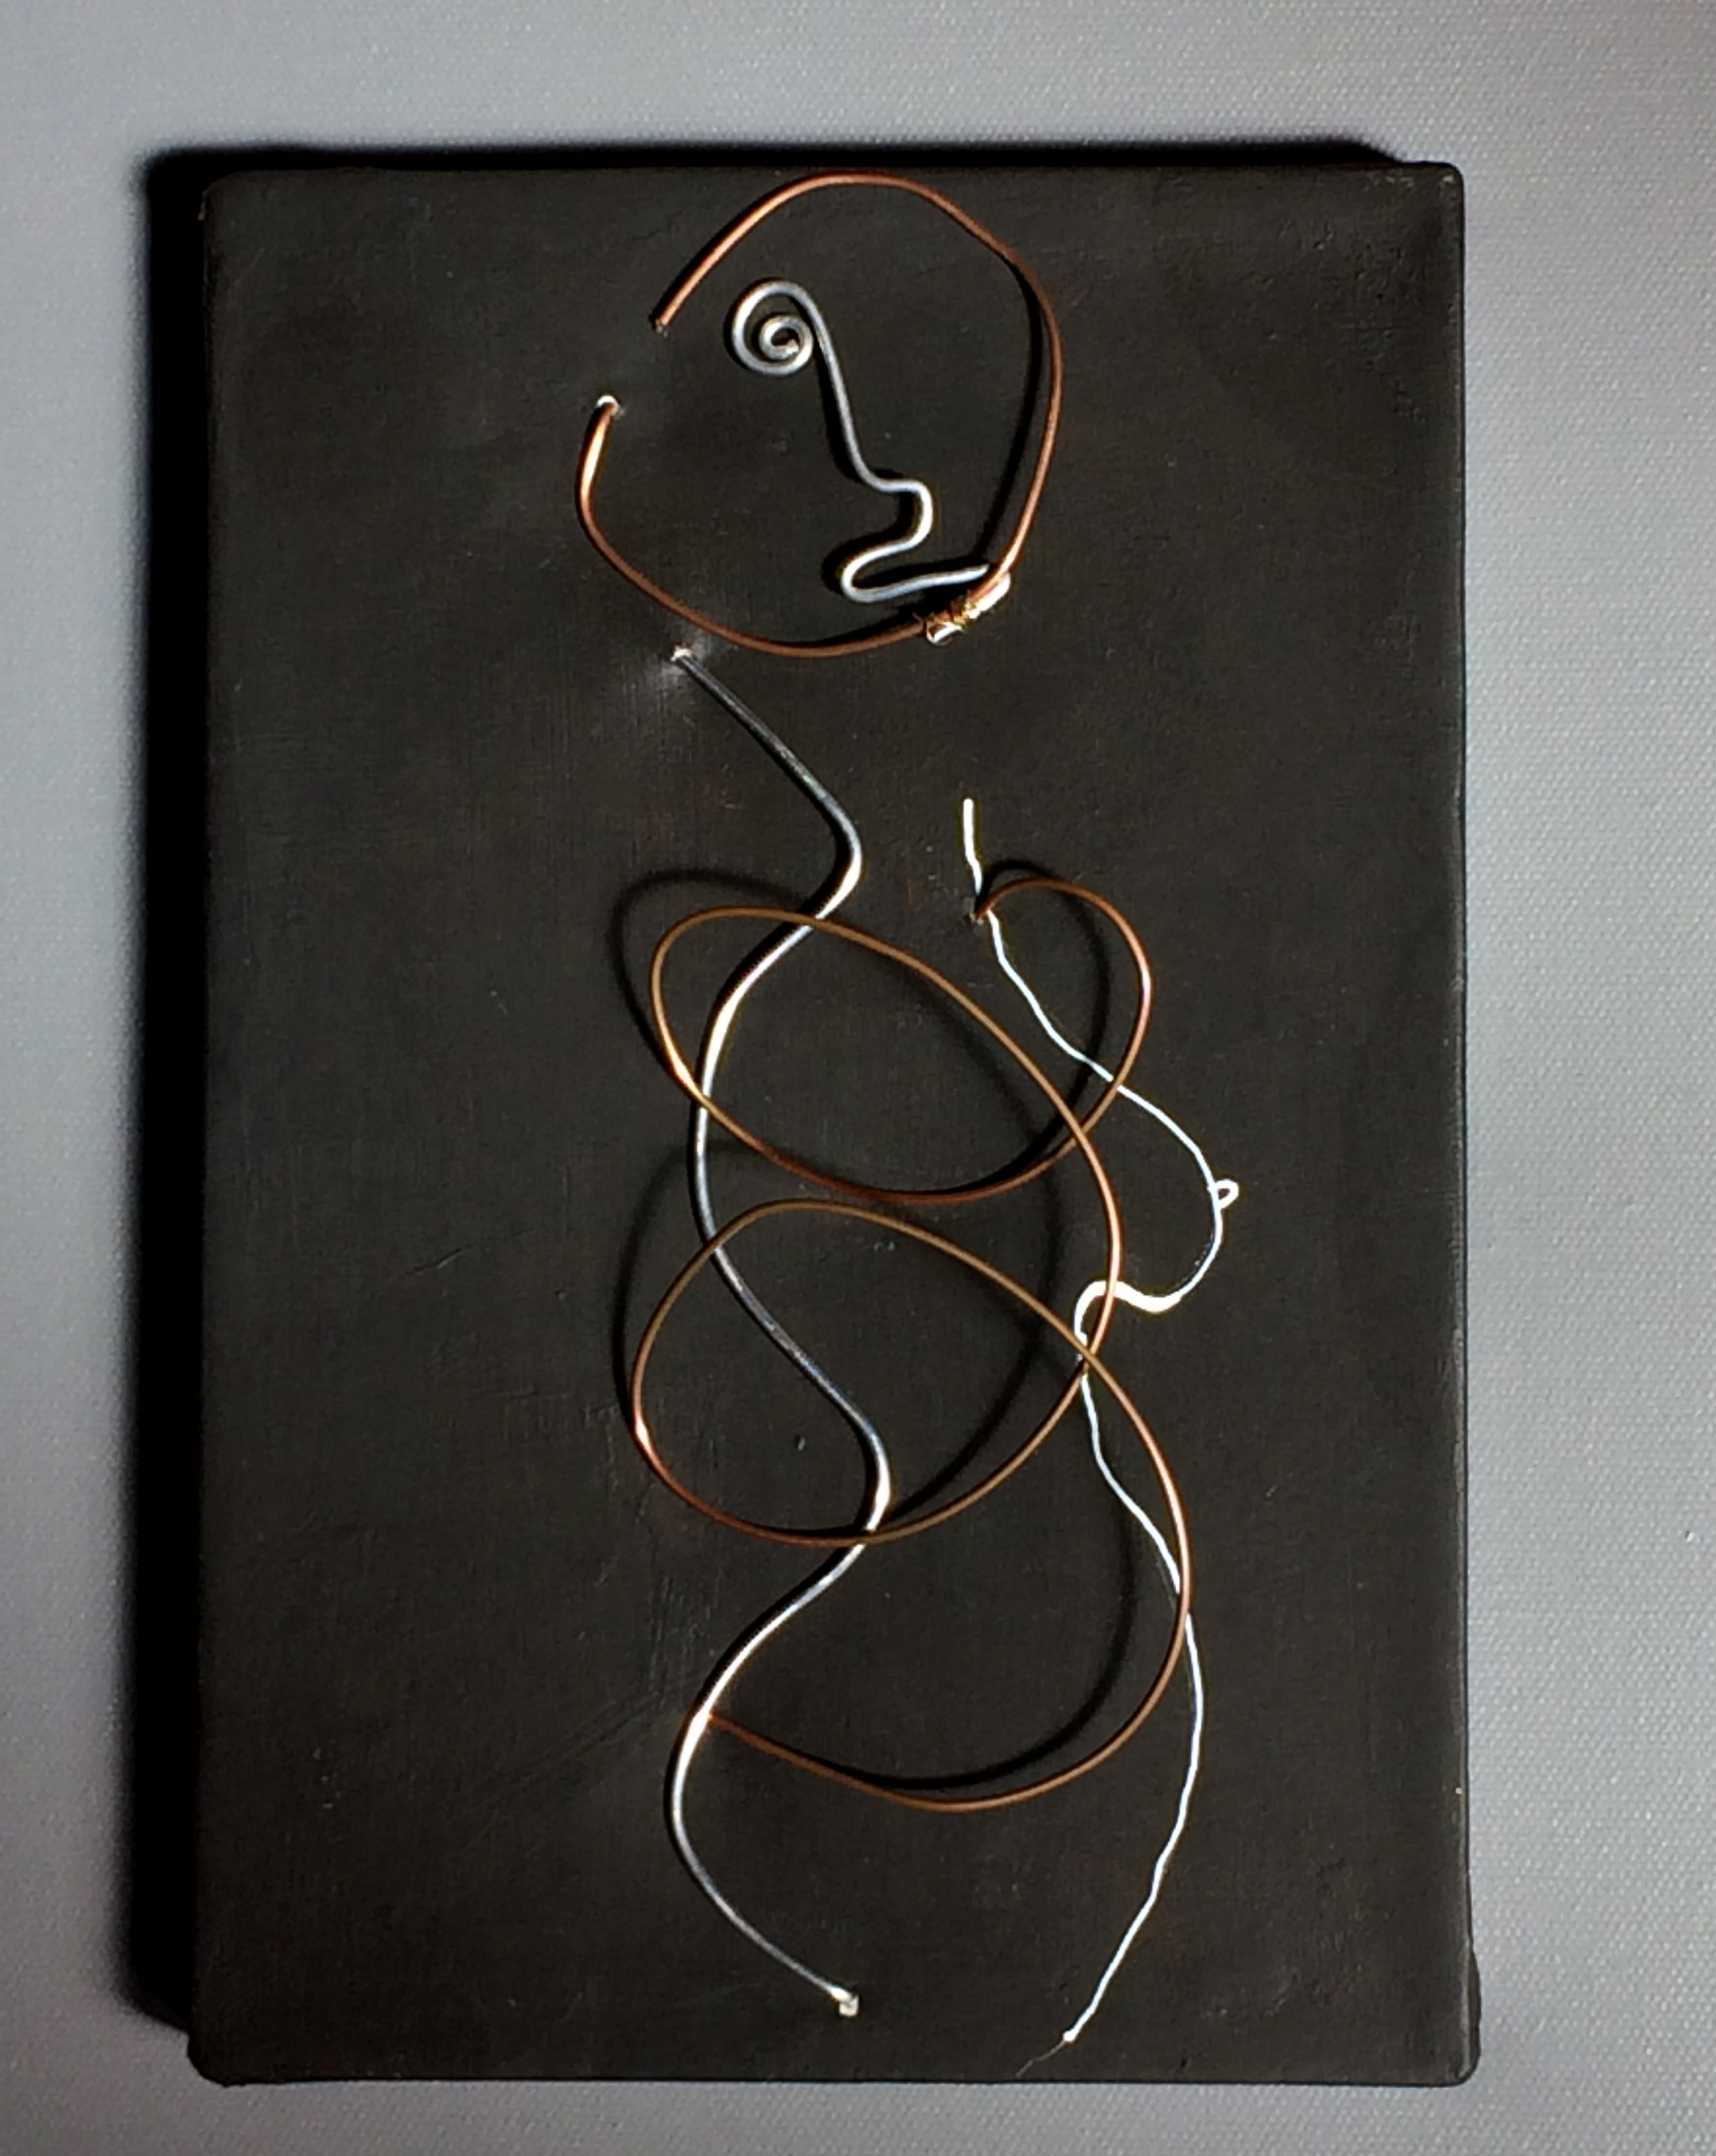   Wire Woman  (2013), 12 x 12 in, white acrylic ink, copper wire on canvas 